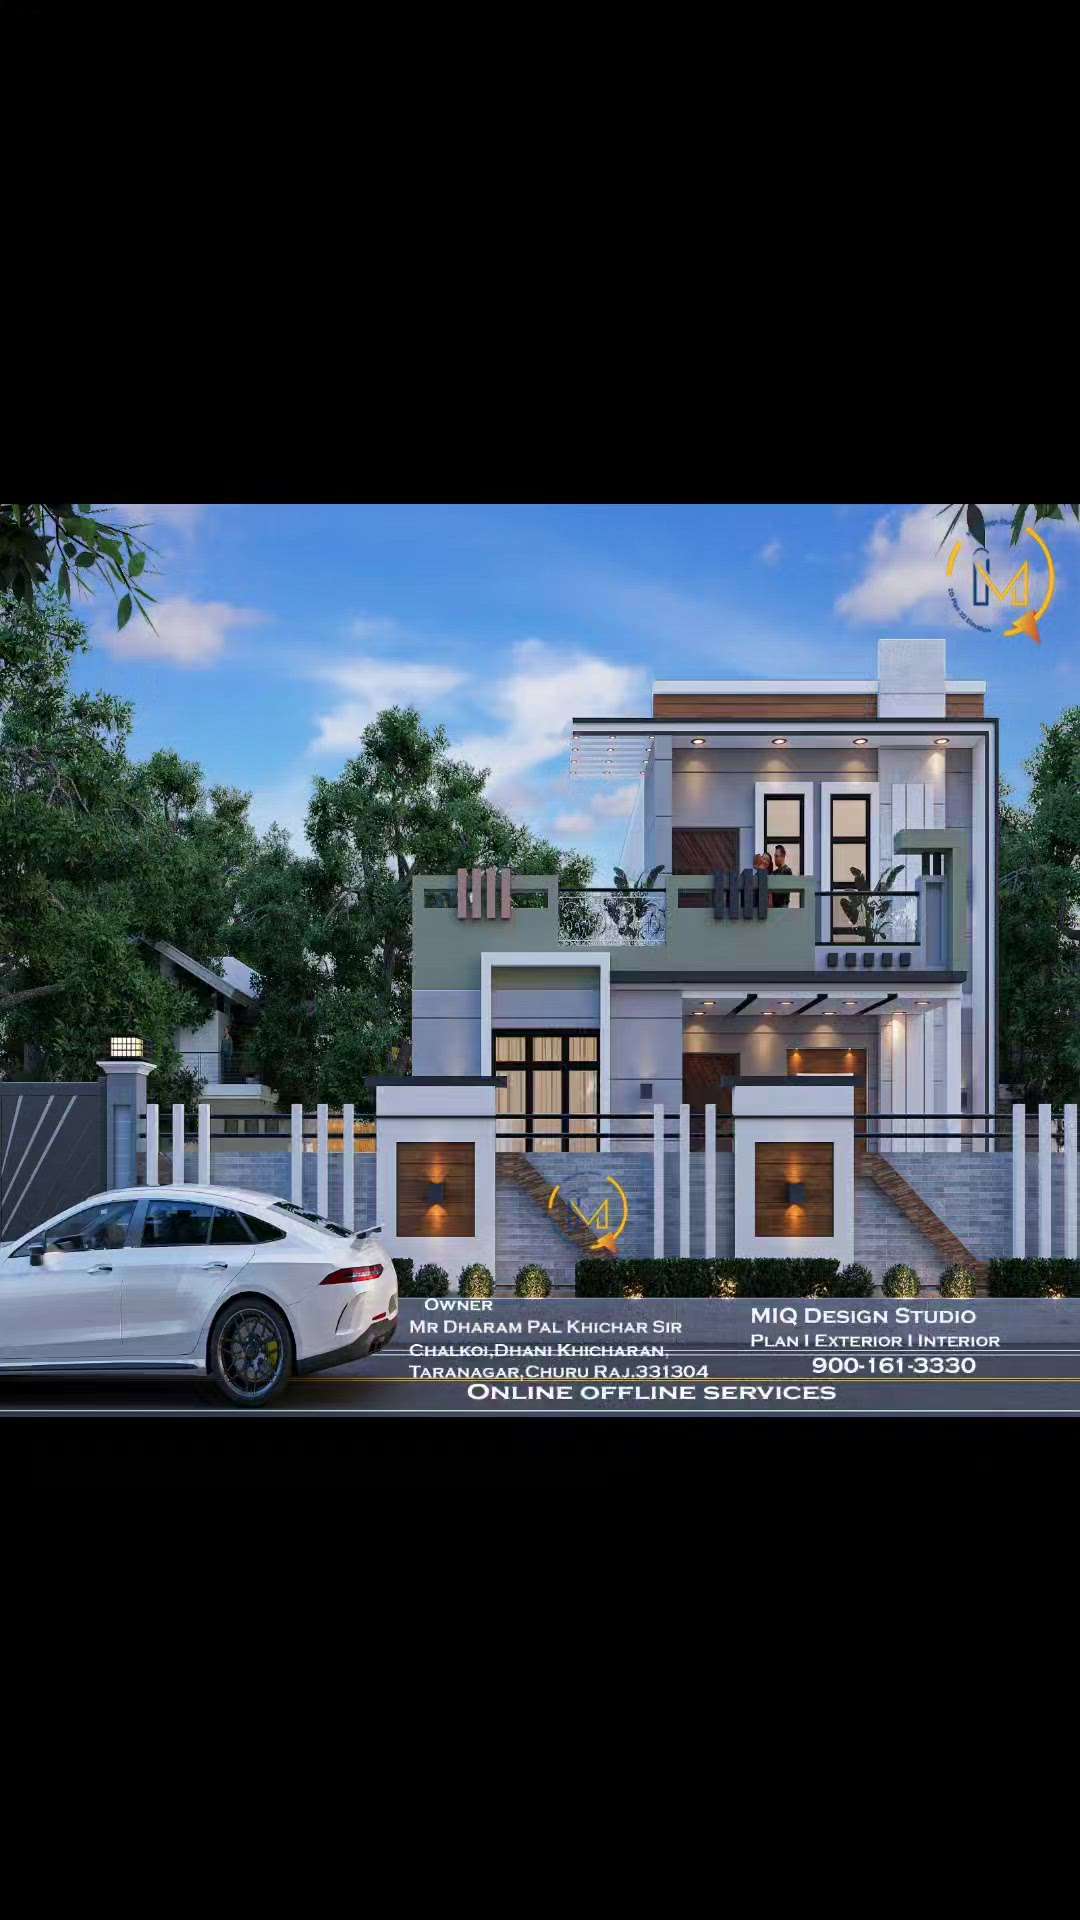 *2D Plan Work Details* 1-Plan Layout - 5000/-
2-Working Drawing 2000/-
3-Electrical Plan 3000/-
4-Column Design Plan -3000/-
5- Door Window Design Plan Plan-1000/-
6-2D Plan With High Class Interior Plan Only 6500/-
7- Details Plan 2000/-
*3D Elevation*
1-3D Elevation Front View with High Resolution Only 7500/-
2 -Two Side Elevation 10000/-
3- Elevation With Details File Front View Only 10000/-
*Interior Work*
1- Per View 3000/- Only
2-Two Side View -5000/- Only
3- Interior With CAD Details File per View 4500/-
*Walkthrough*
1- 30 Secend Animation Video with High Resolution Only 5500/-Rs 
*Note Advance Payment Service*